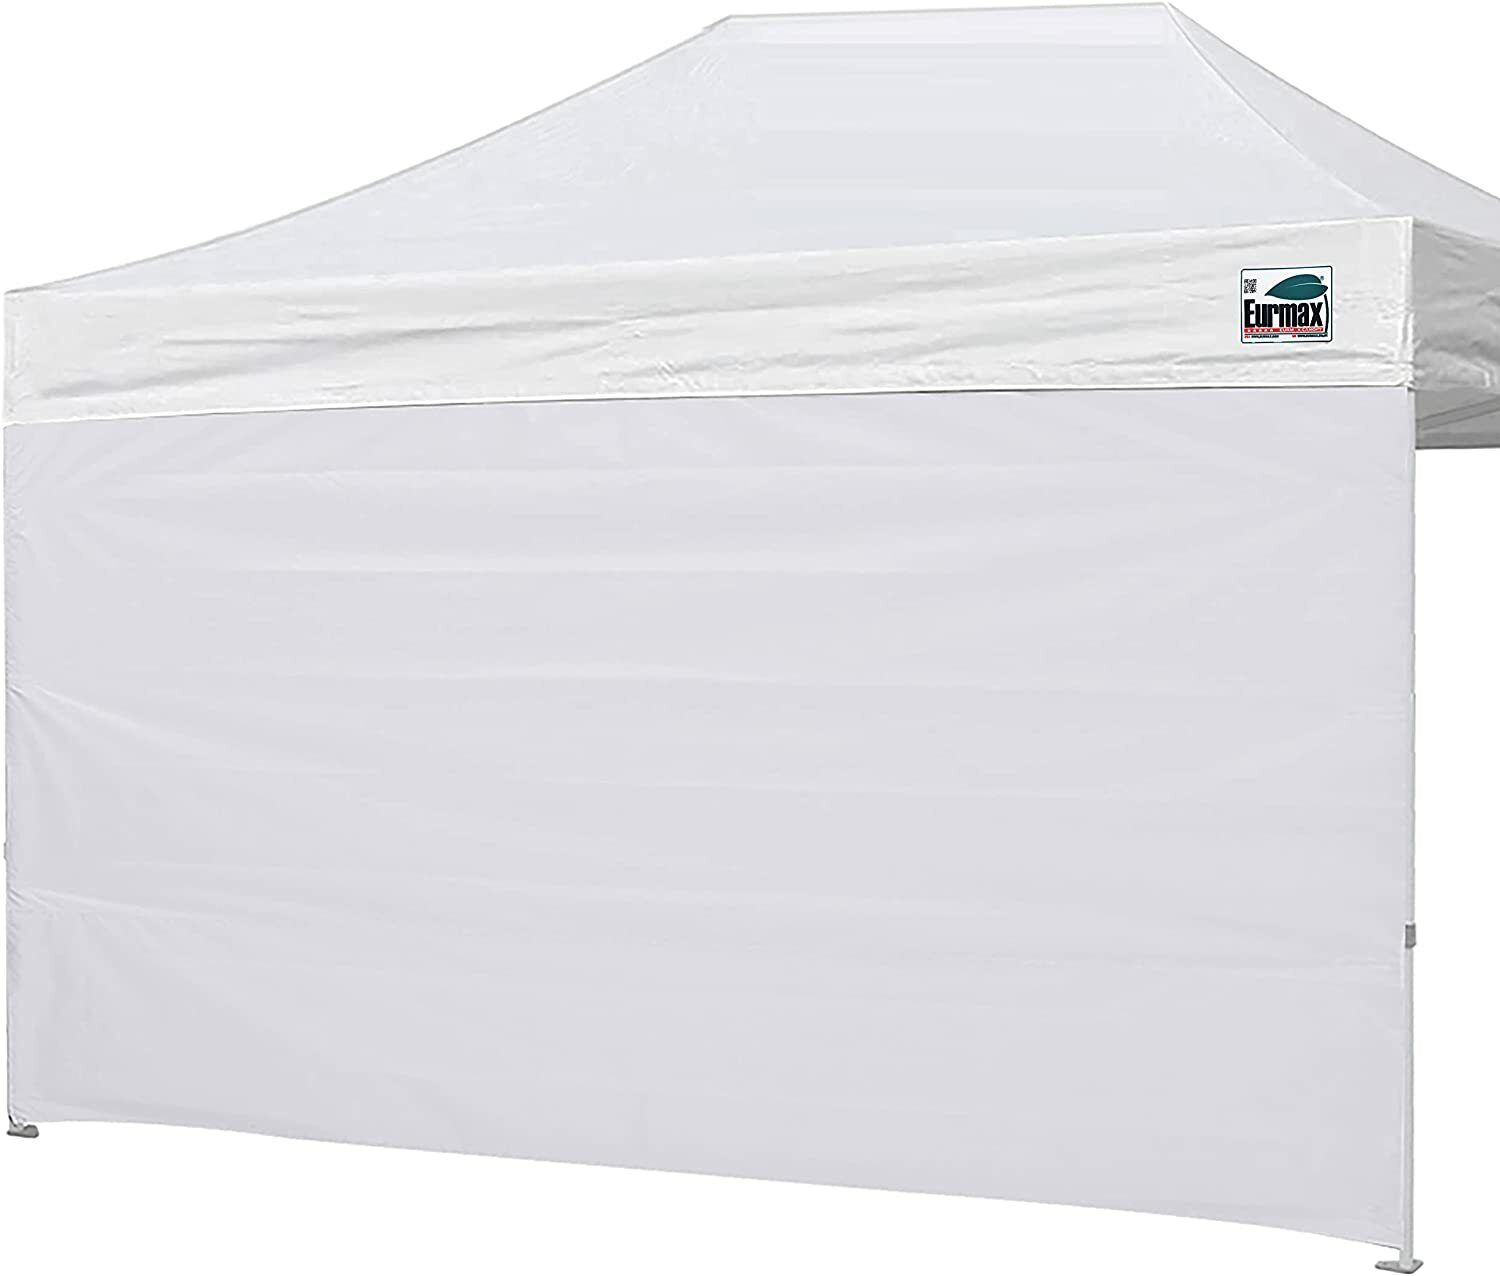 Eurmax Instant Sidewall for 10x15 Pop up Canopy,1 Pack Only